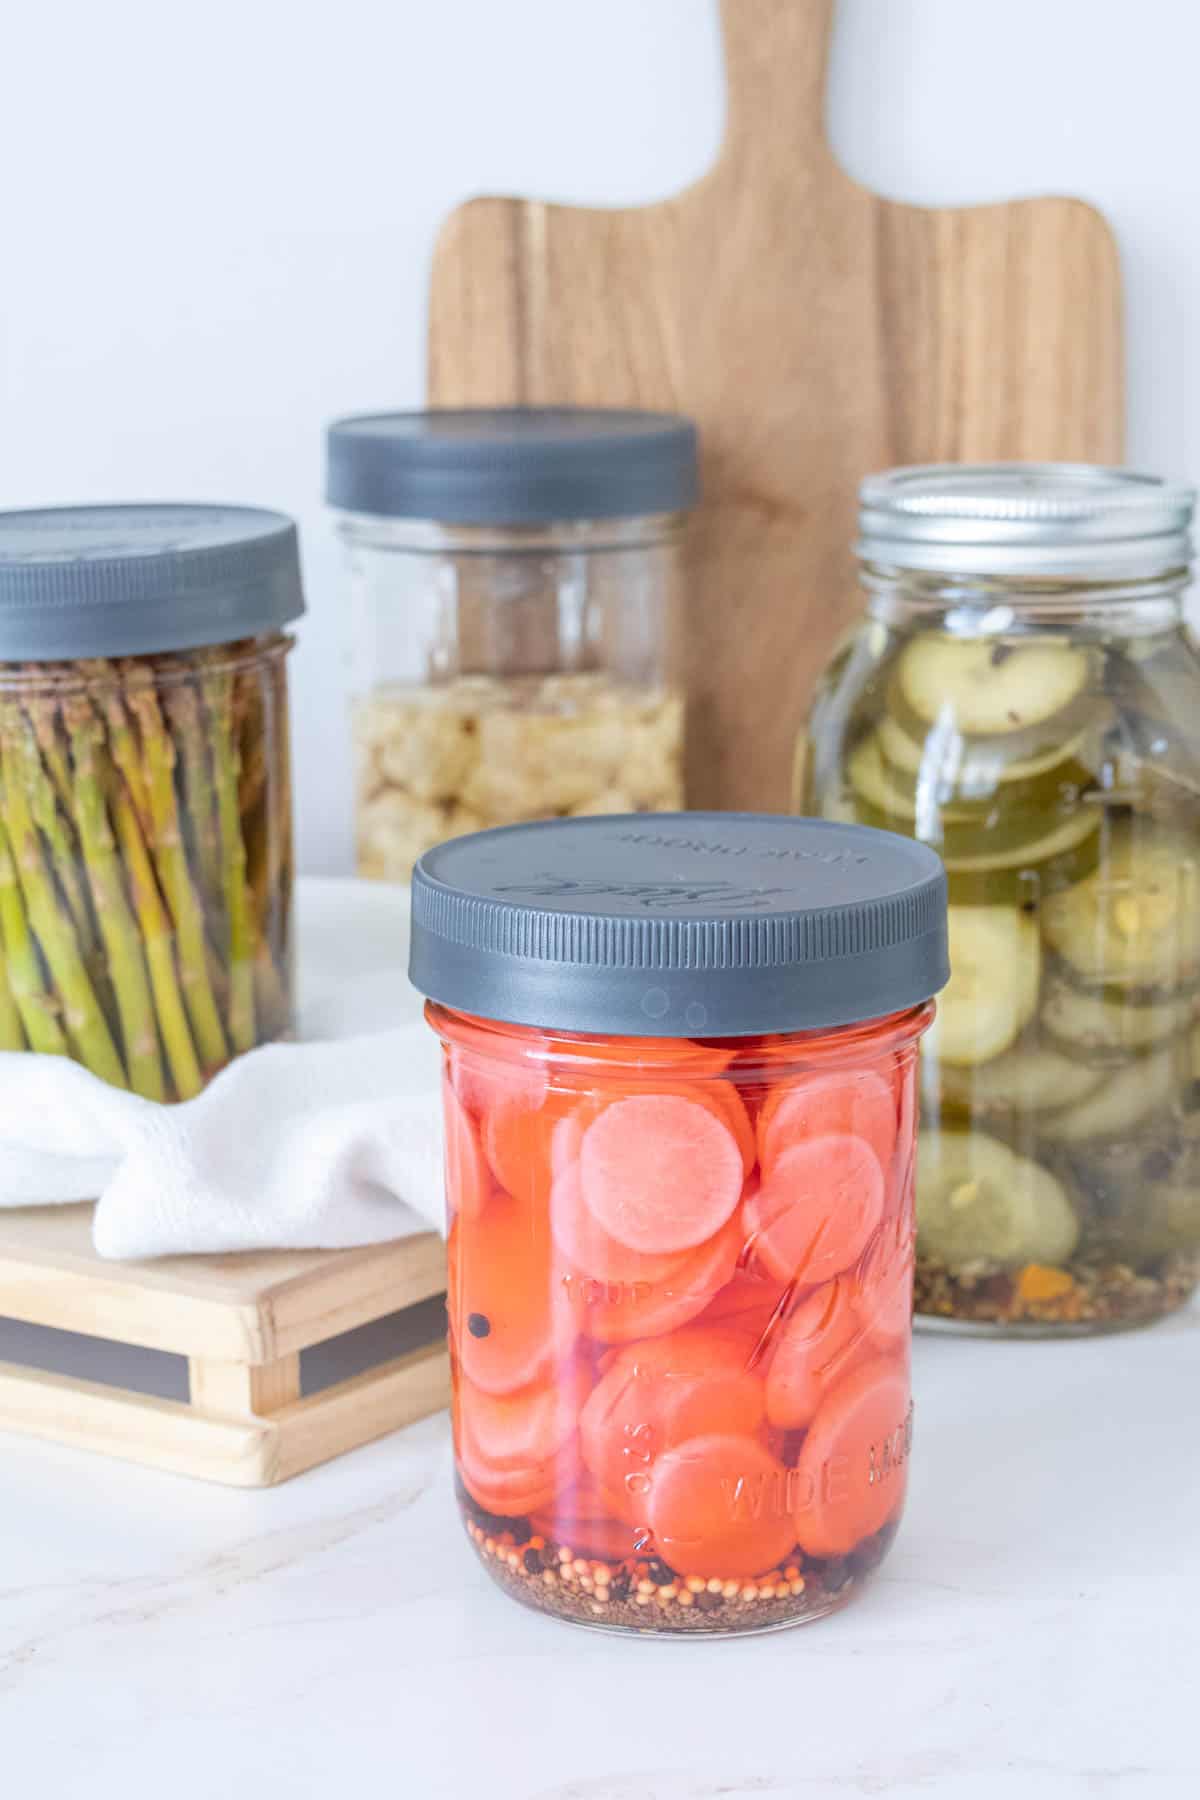 Jars of pickles with pickled radishes in front.